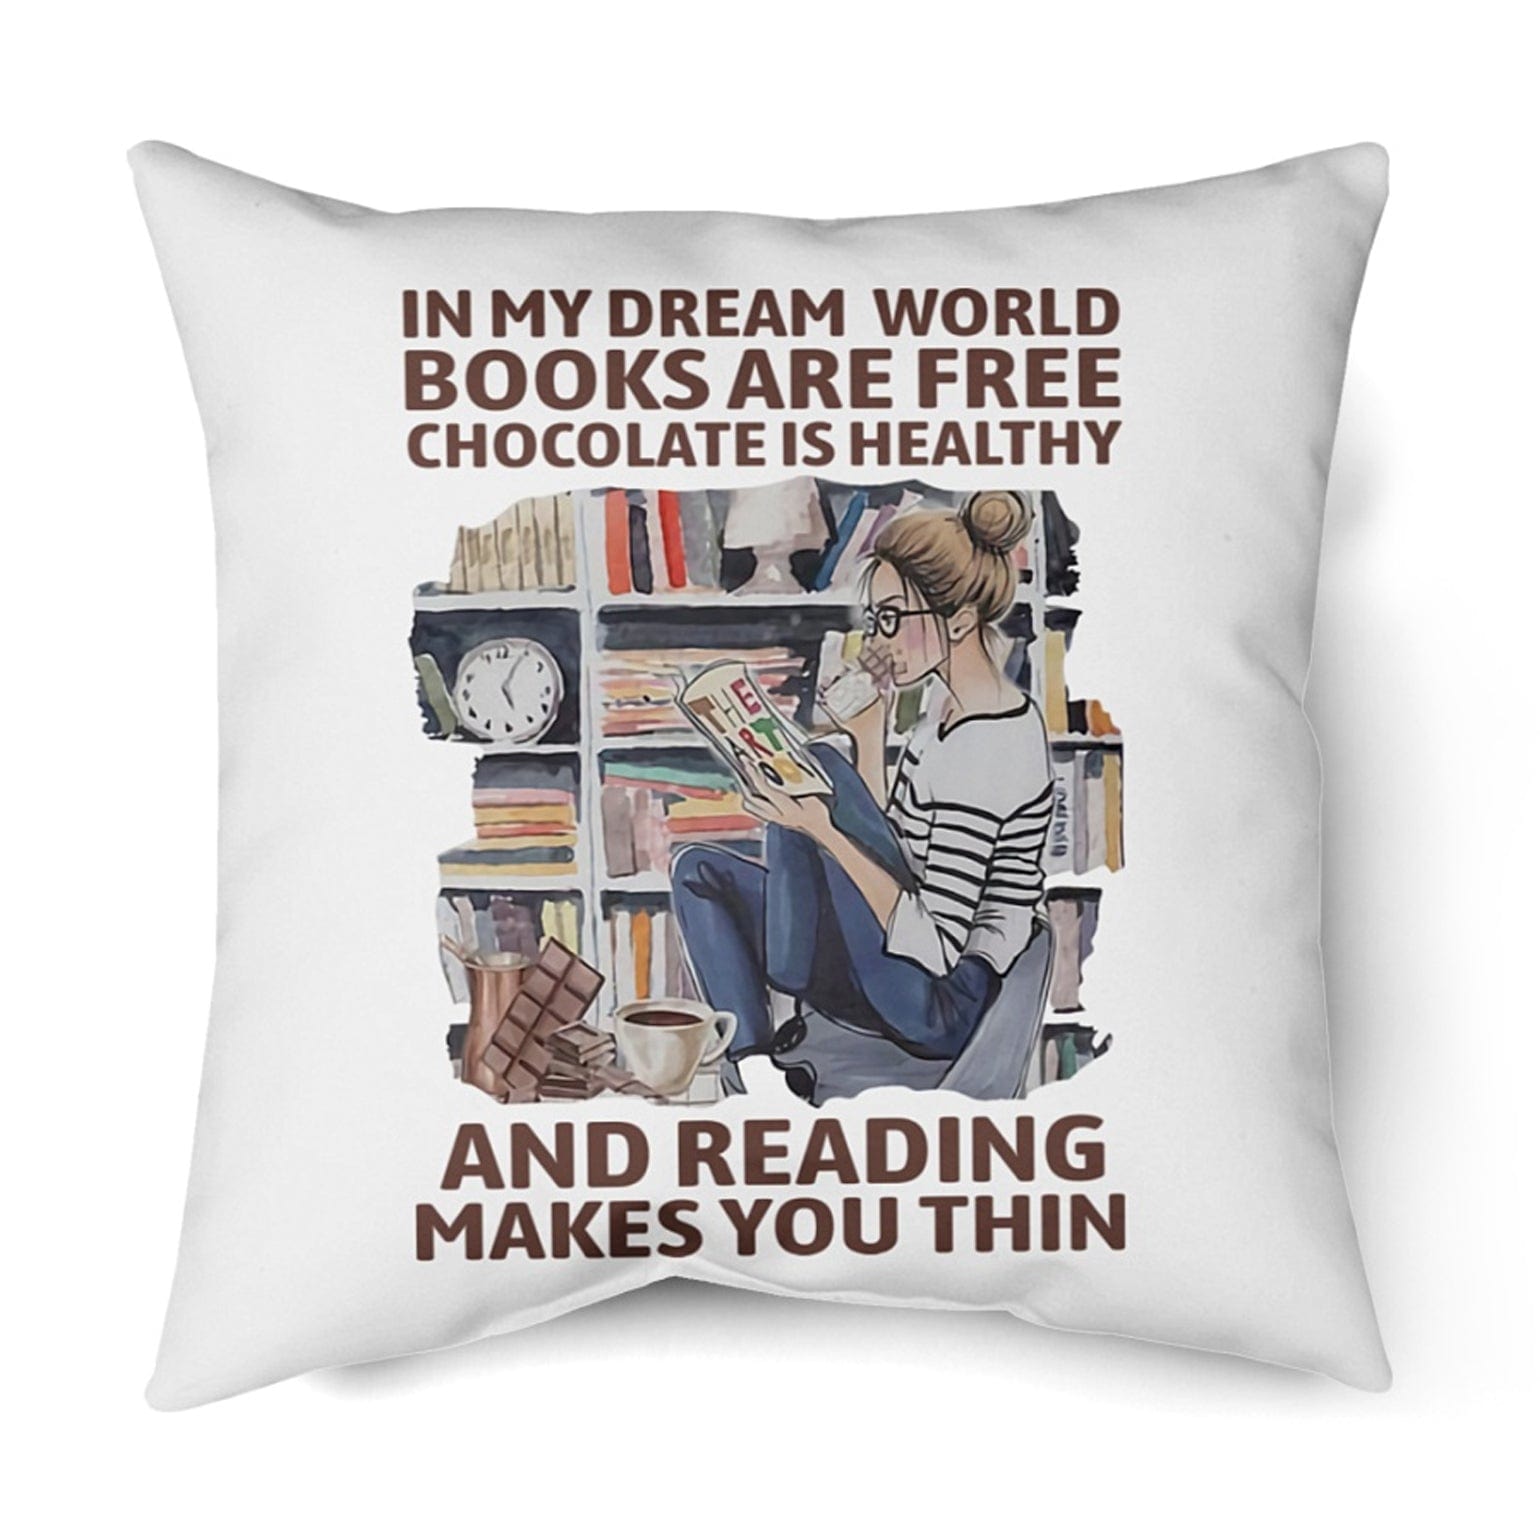 In My Dream World Books Are Free Chocolate Is Healthy Pillow